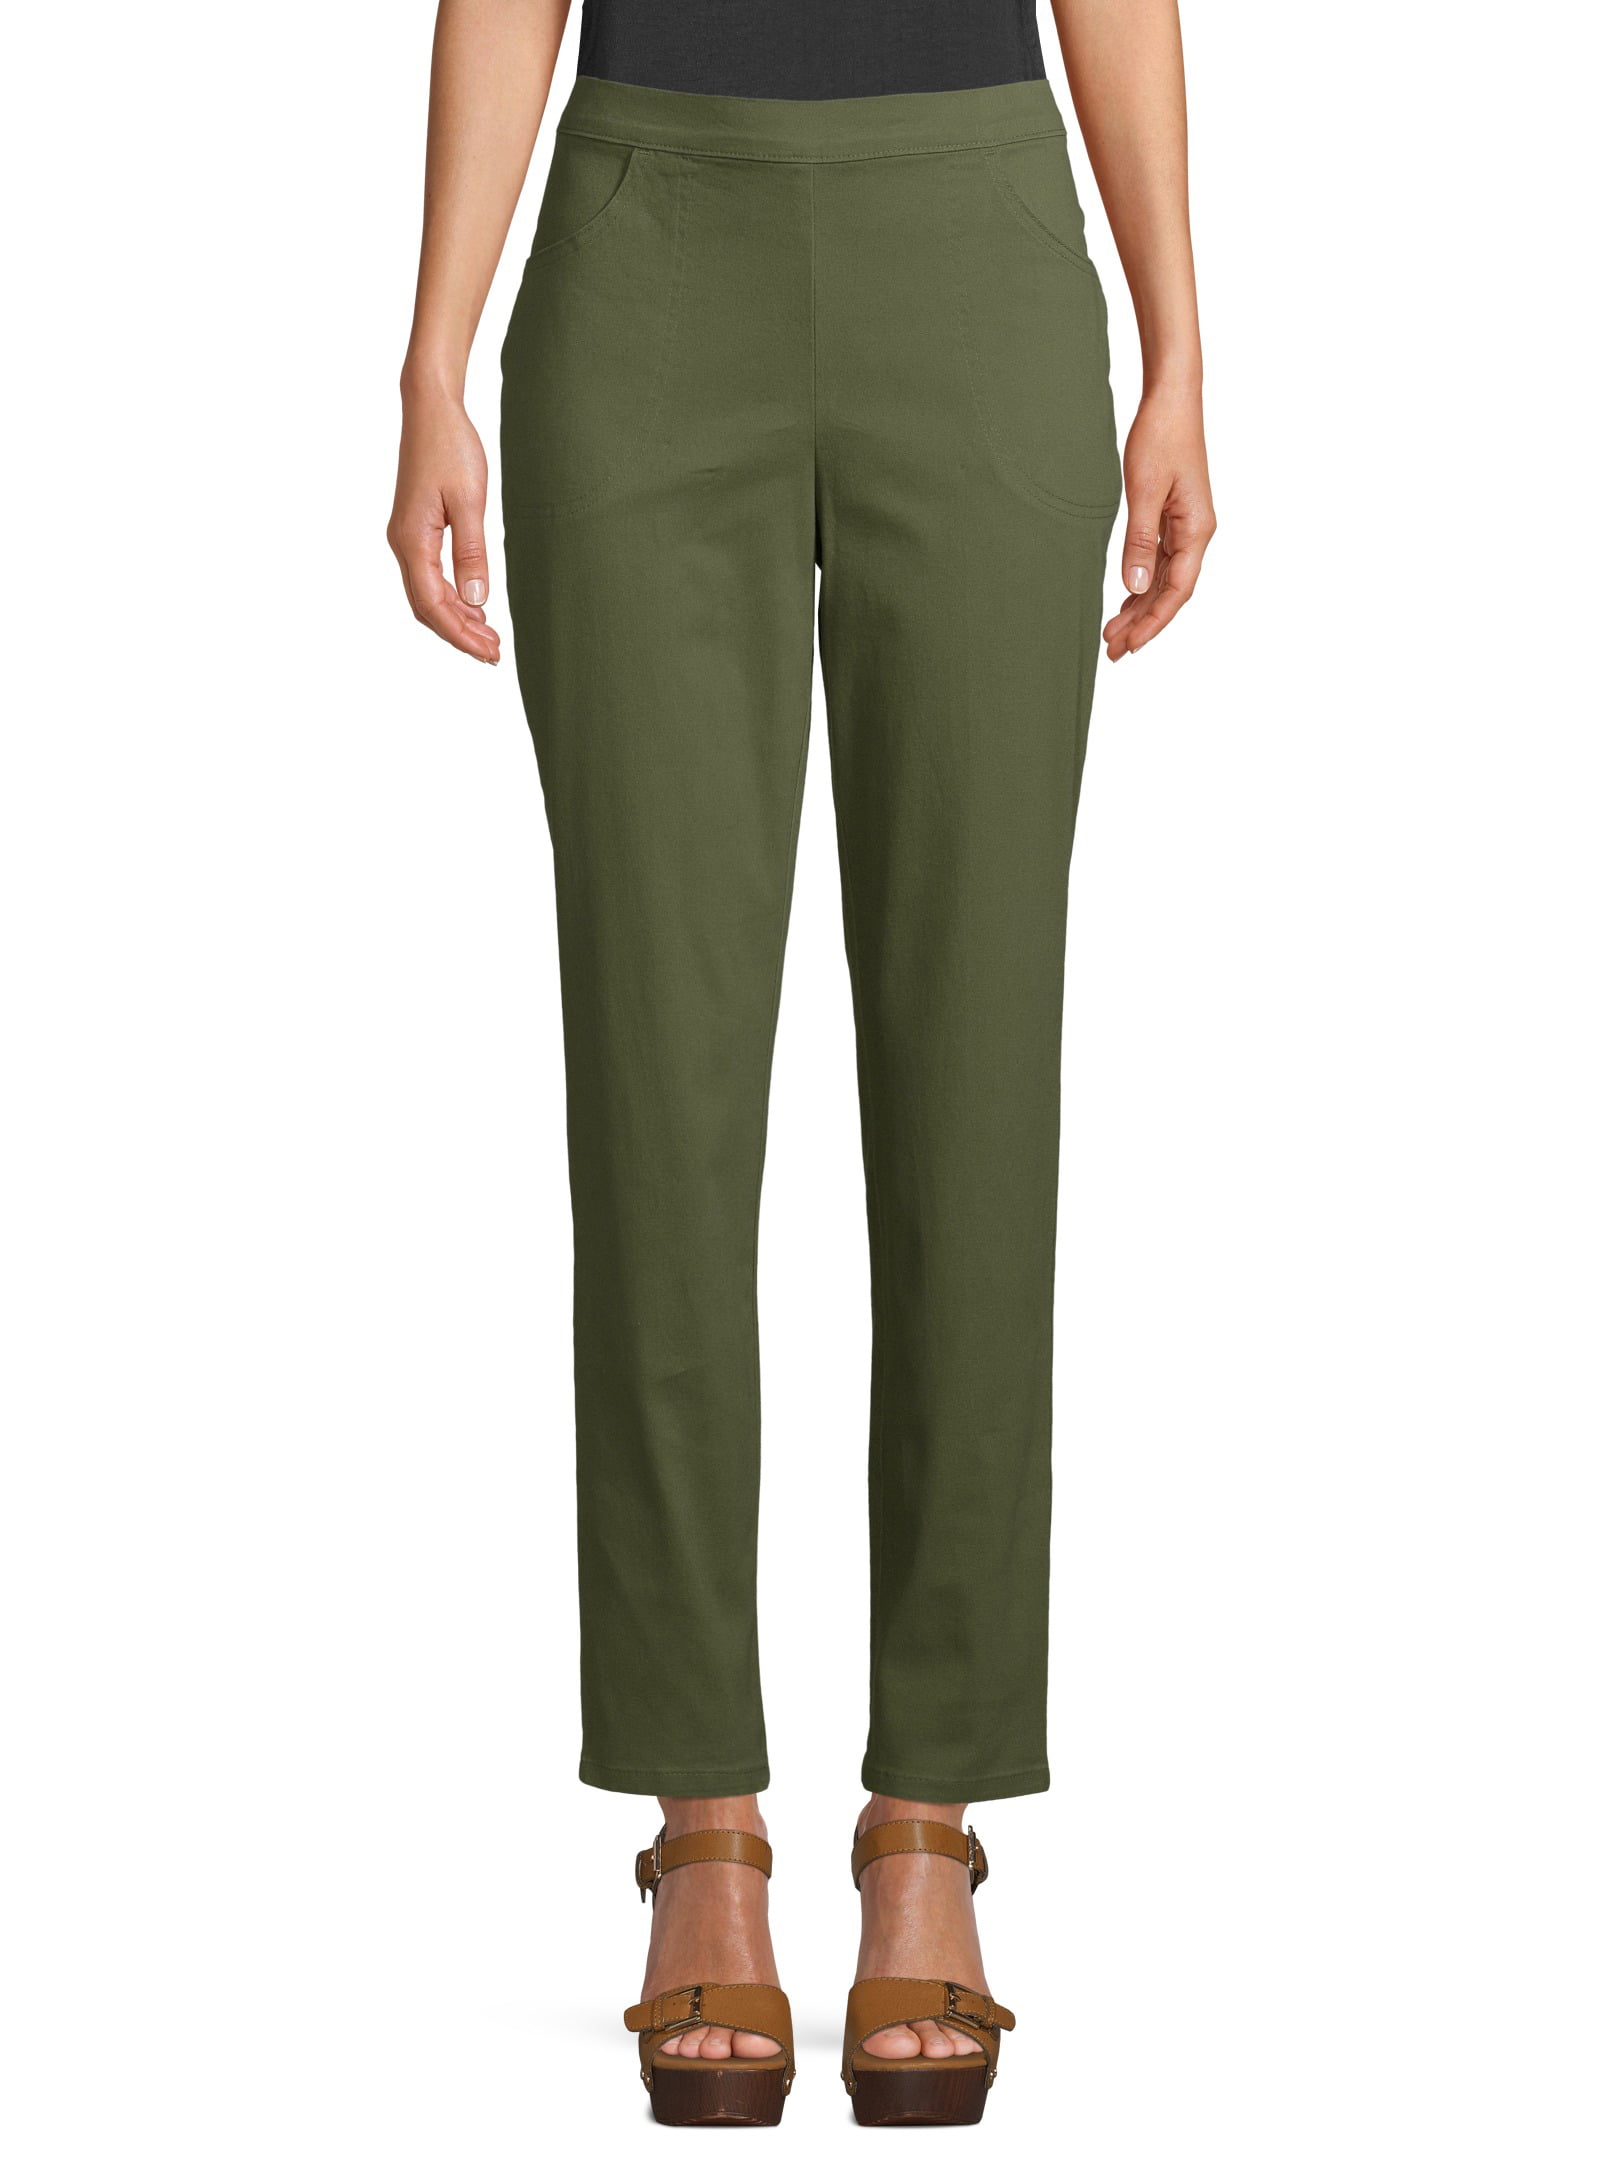 RealSize Women's Stretch Pull On Pants with Pockets - Walmart.com